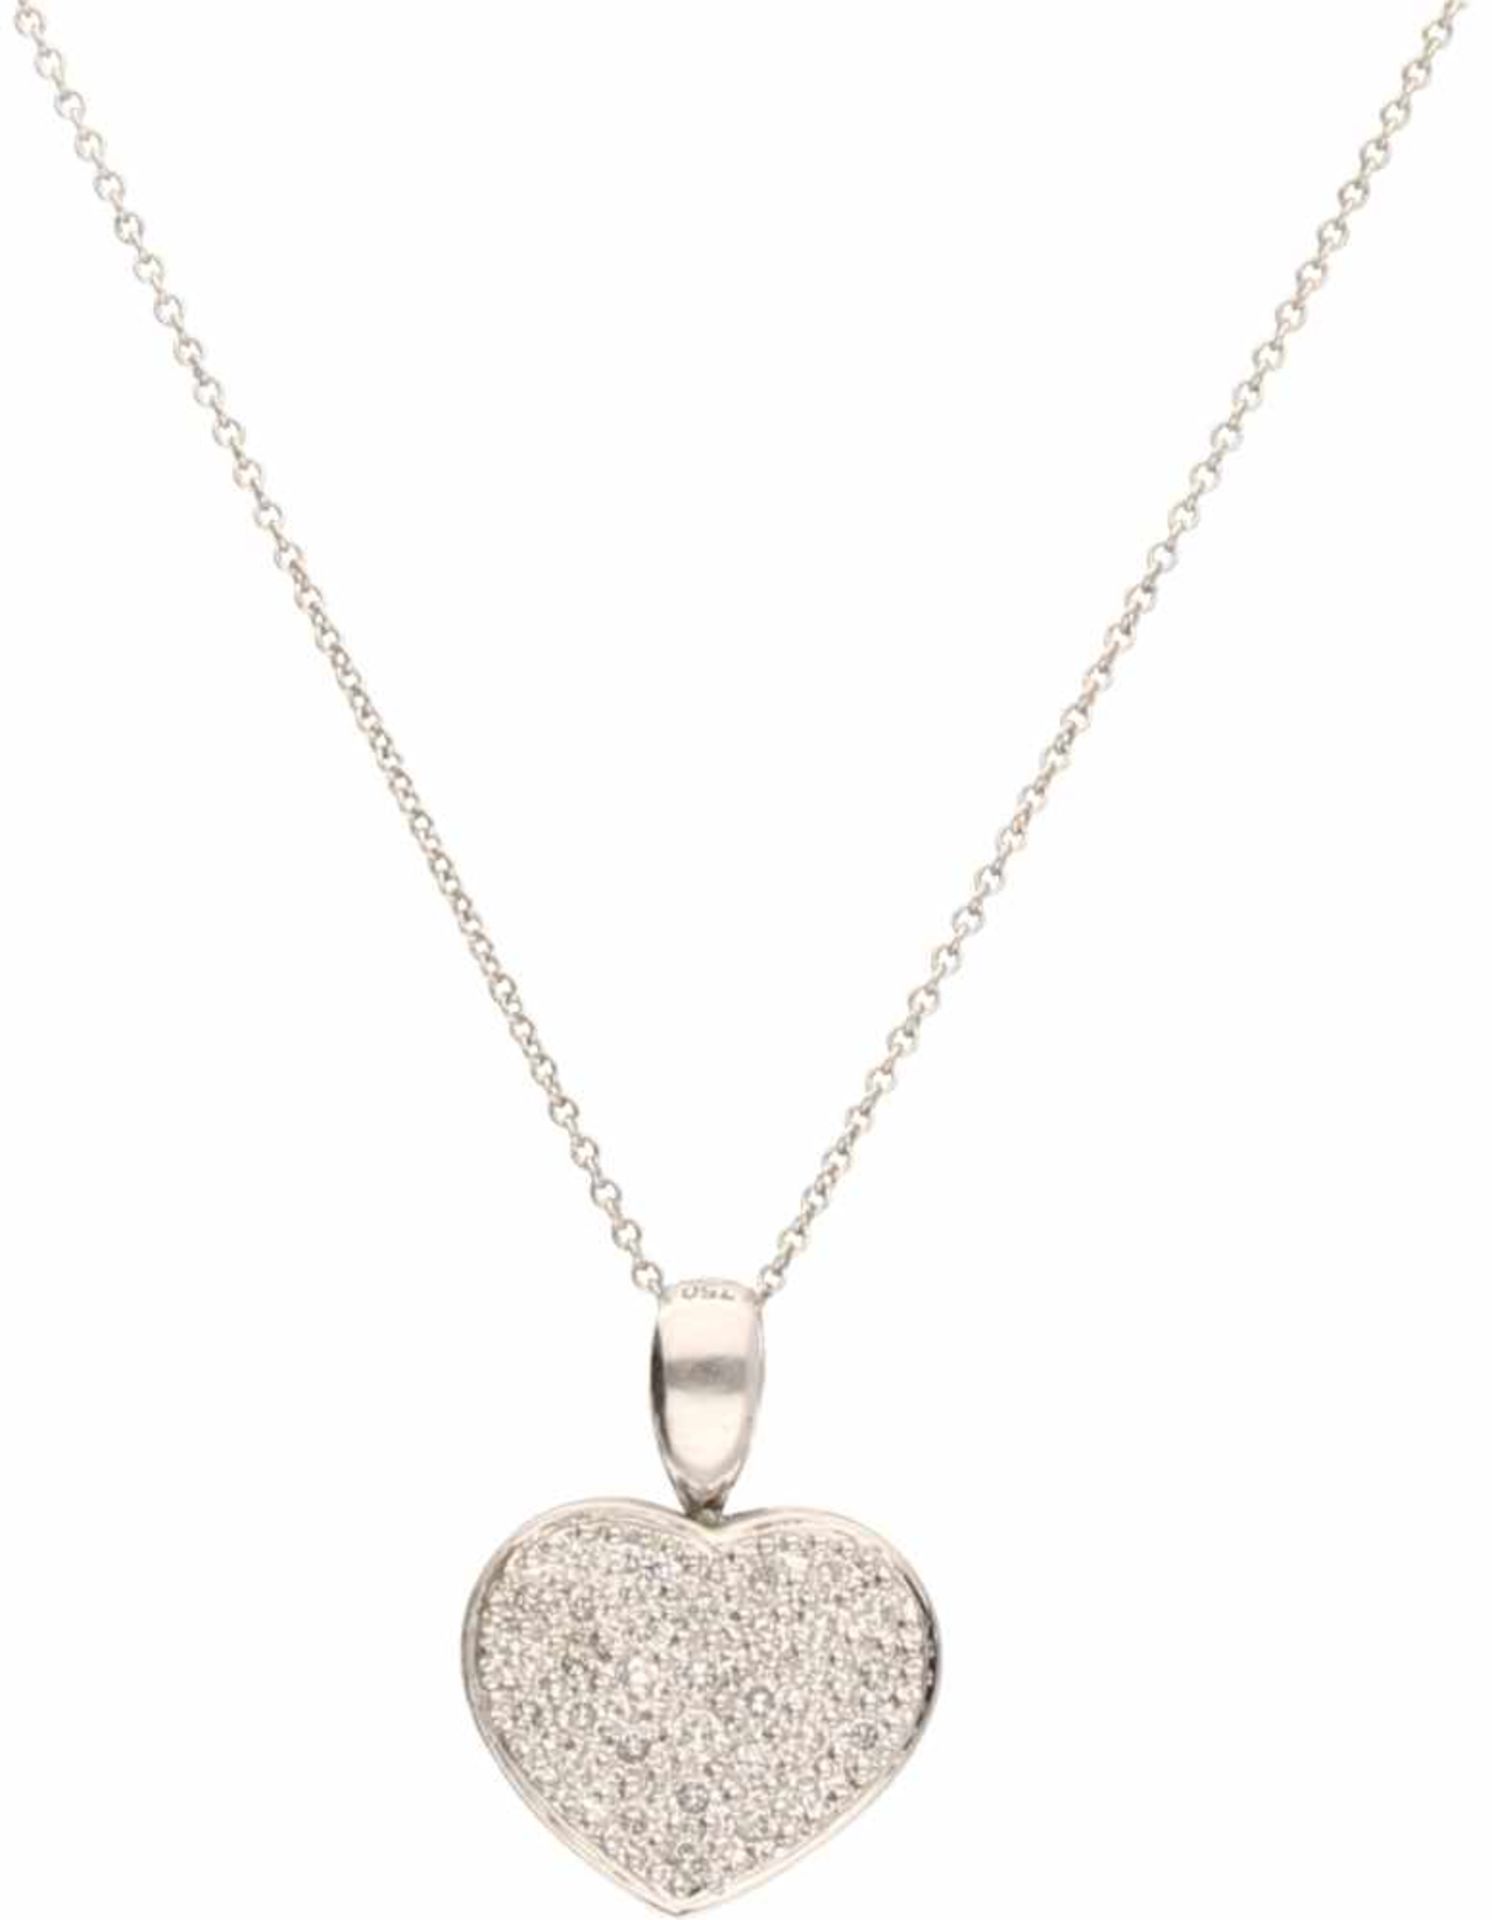 Necklace with heart-shaped pendant white gold, ca. 0.31 carat diamond - 18 ct.